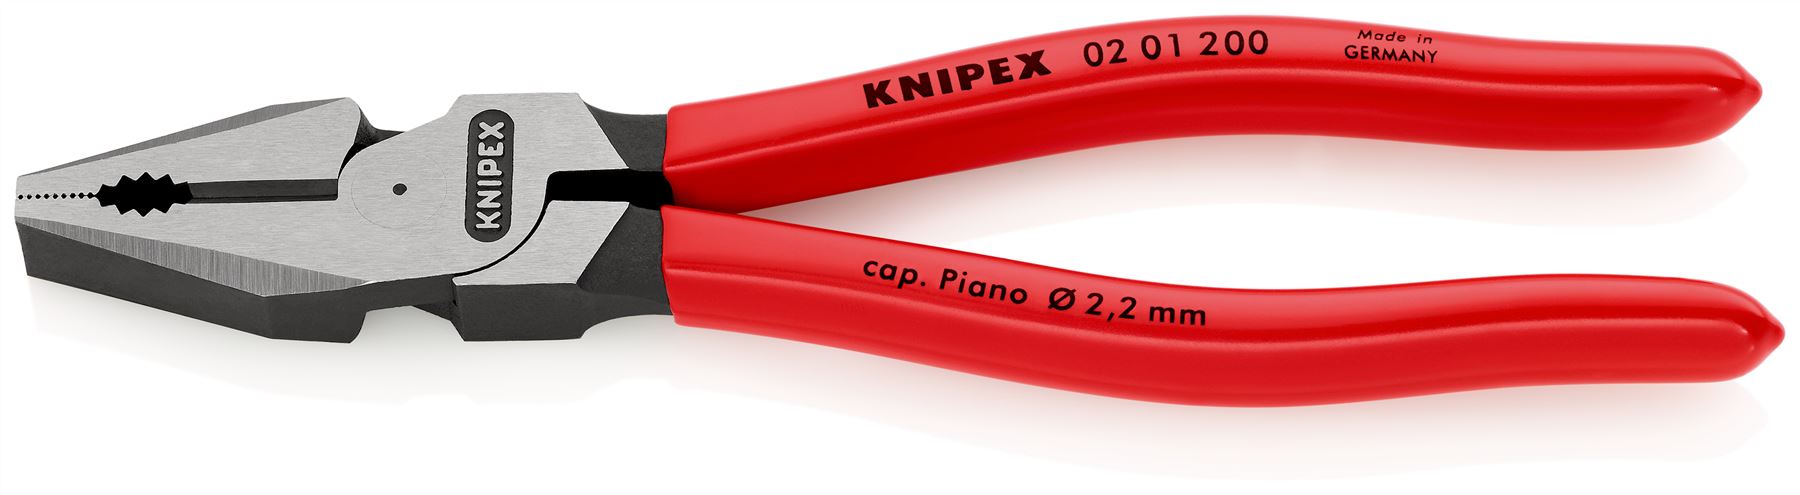 KNIPEX Combination Pliers High Leverage 200mm Plastic Coated 02 01 200